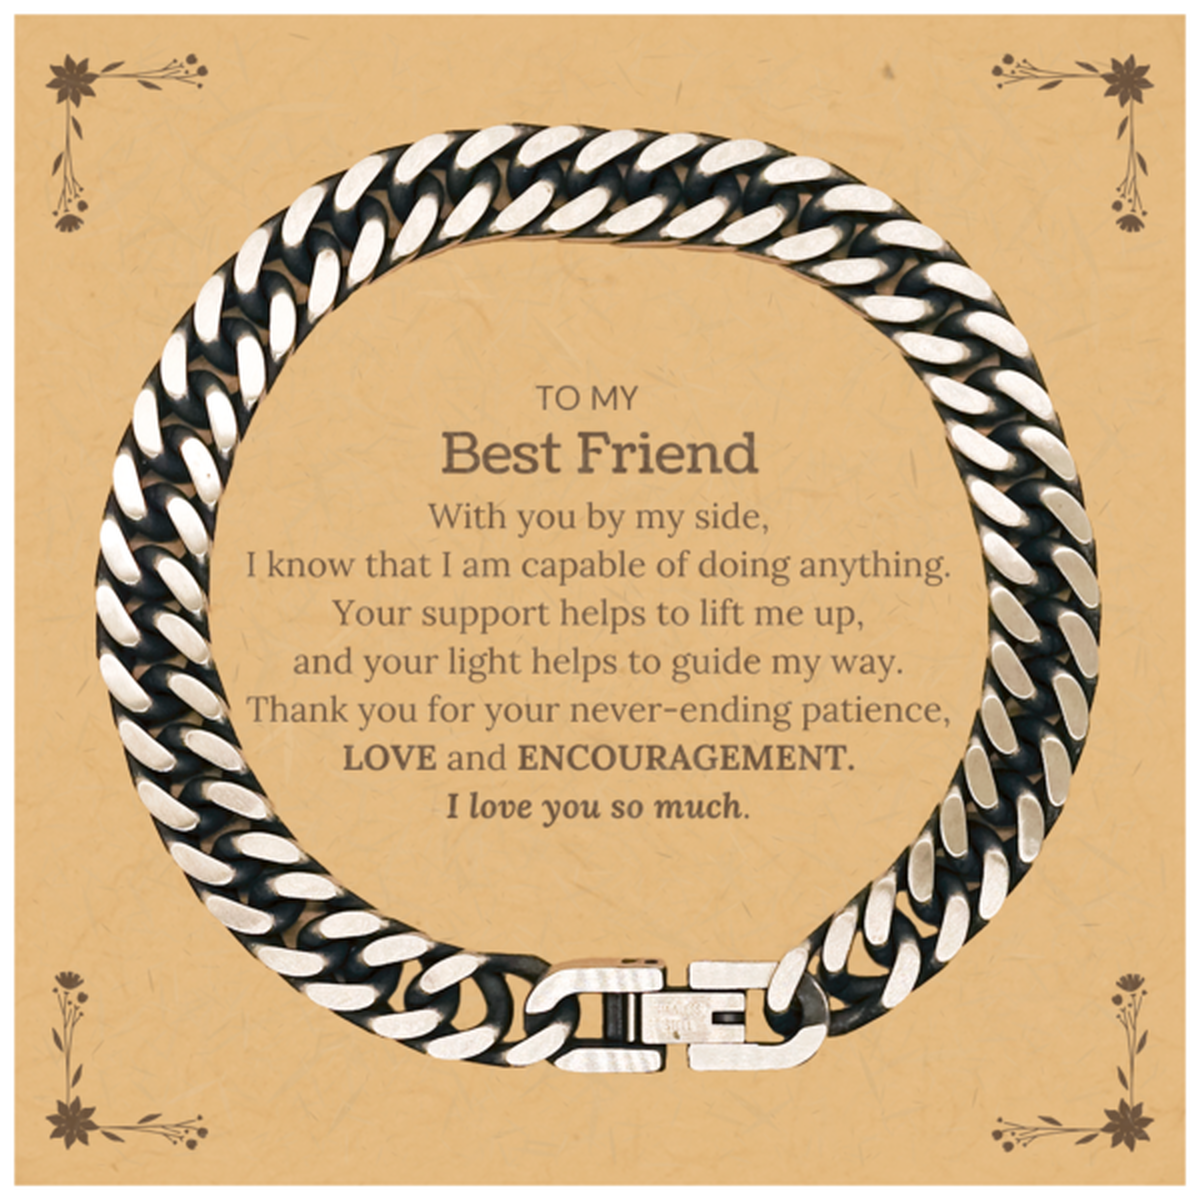 Appreciation Best Friend Cuban Link Chain Bracelet Gifts, To My Best Friend Birthday Christmas Wedding Keepsake Gifts for Best Friend With you by my side, I know that I am capable of doing anything. I love you so much